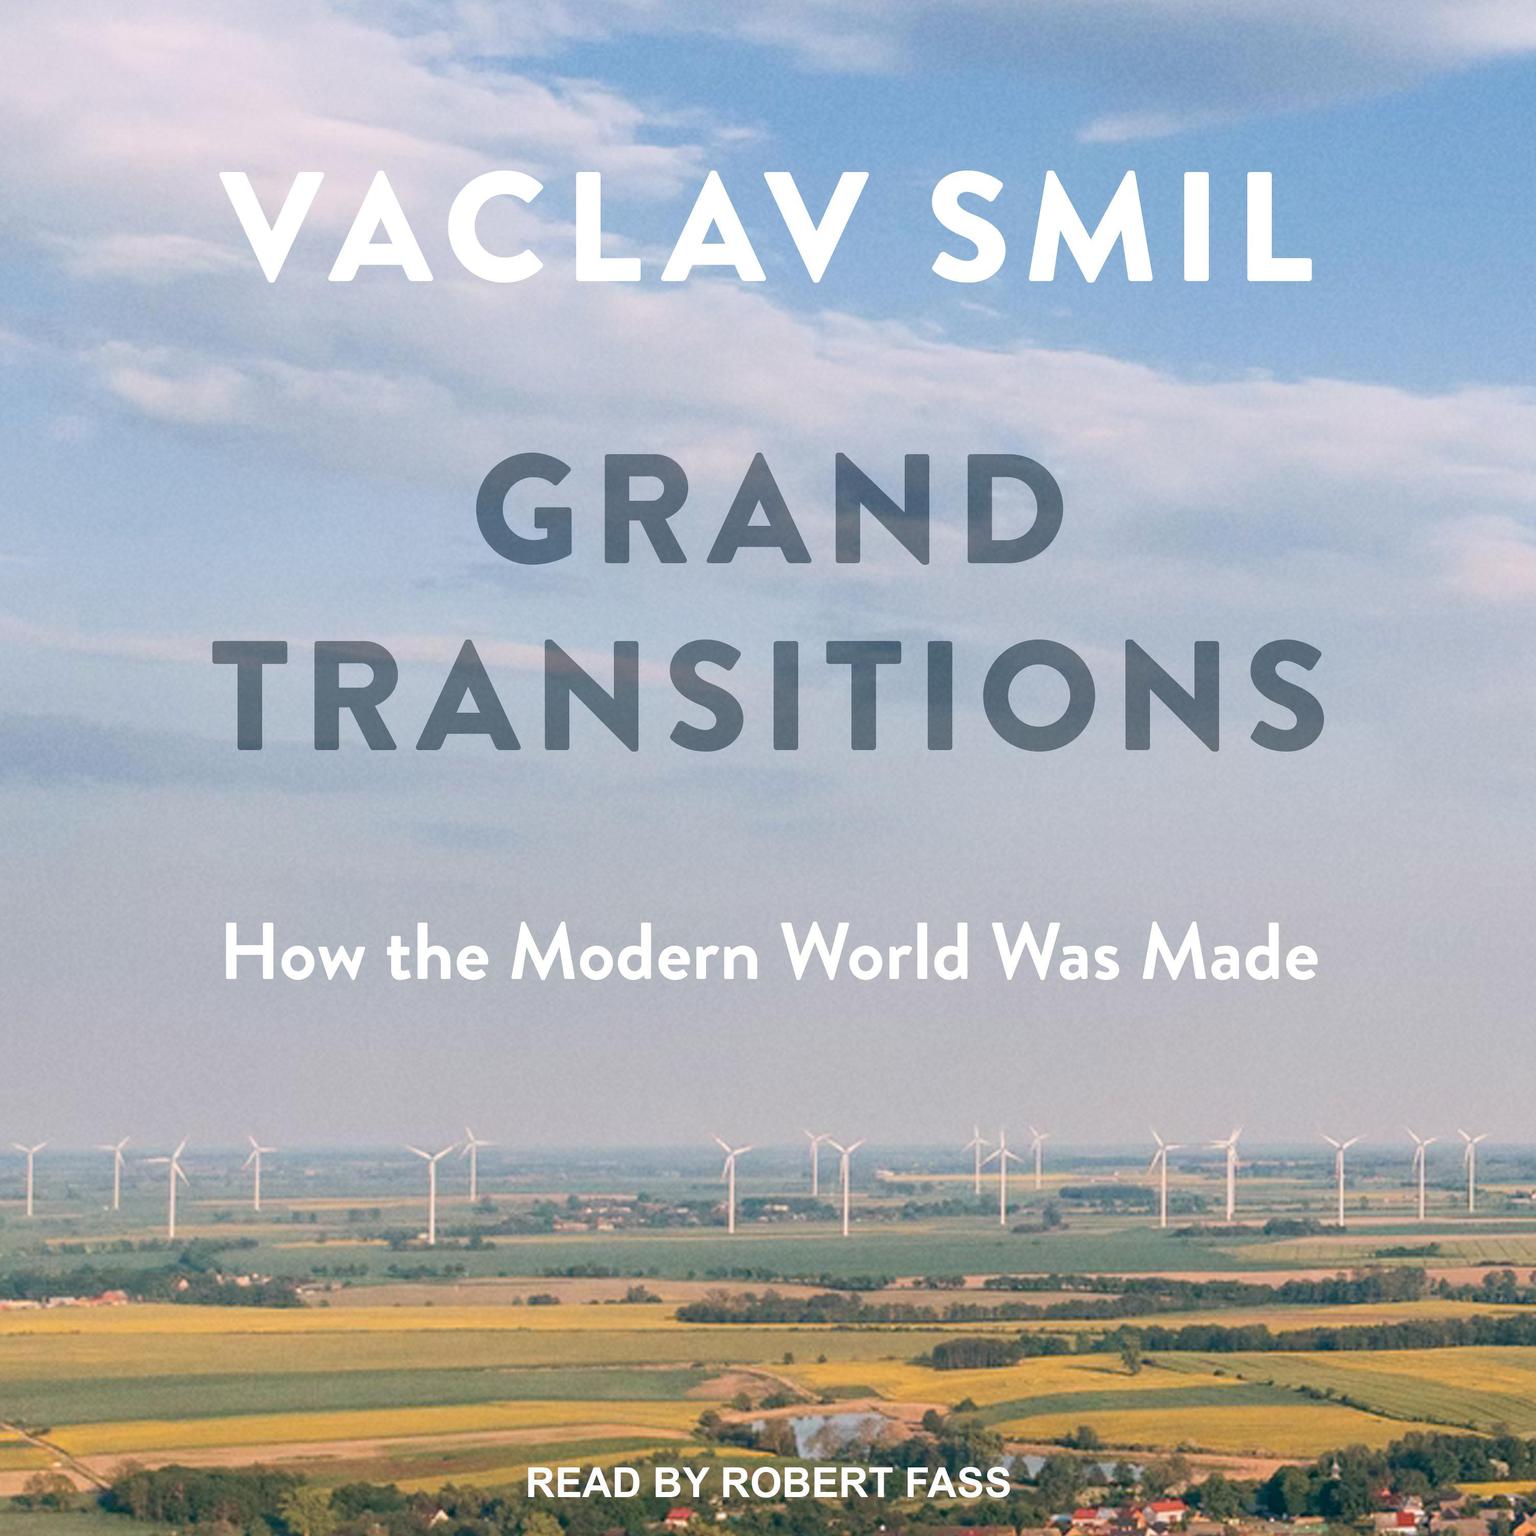 Grand Transitions: How the Modern World Was Made Audiobook, by Vaclav Smil